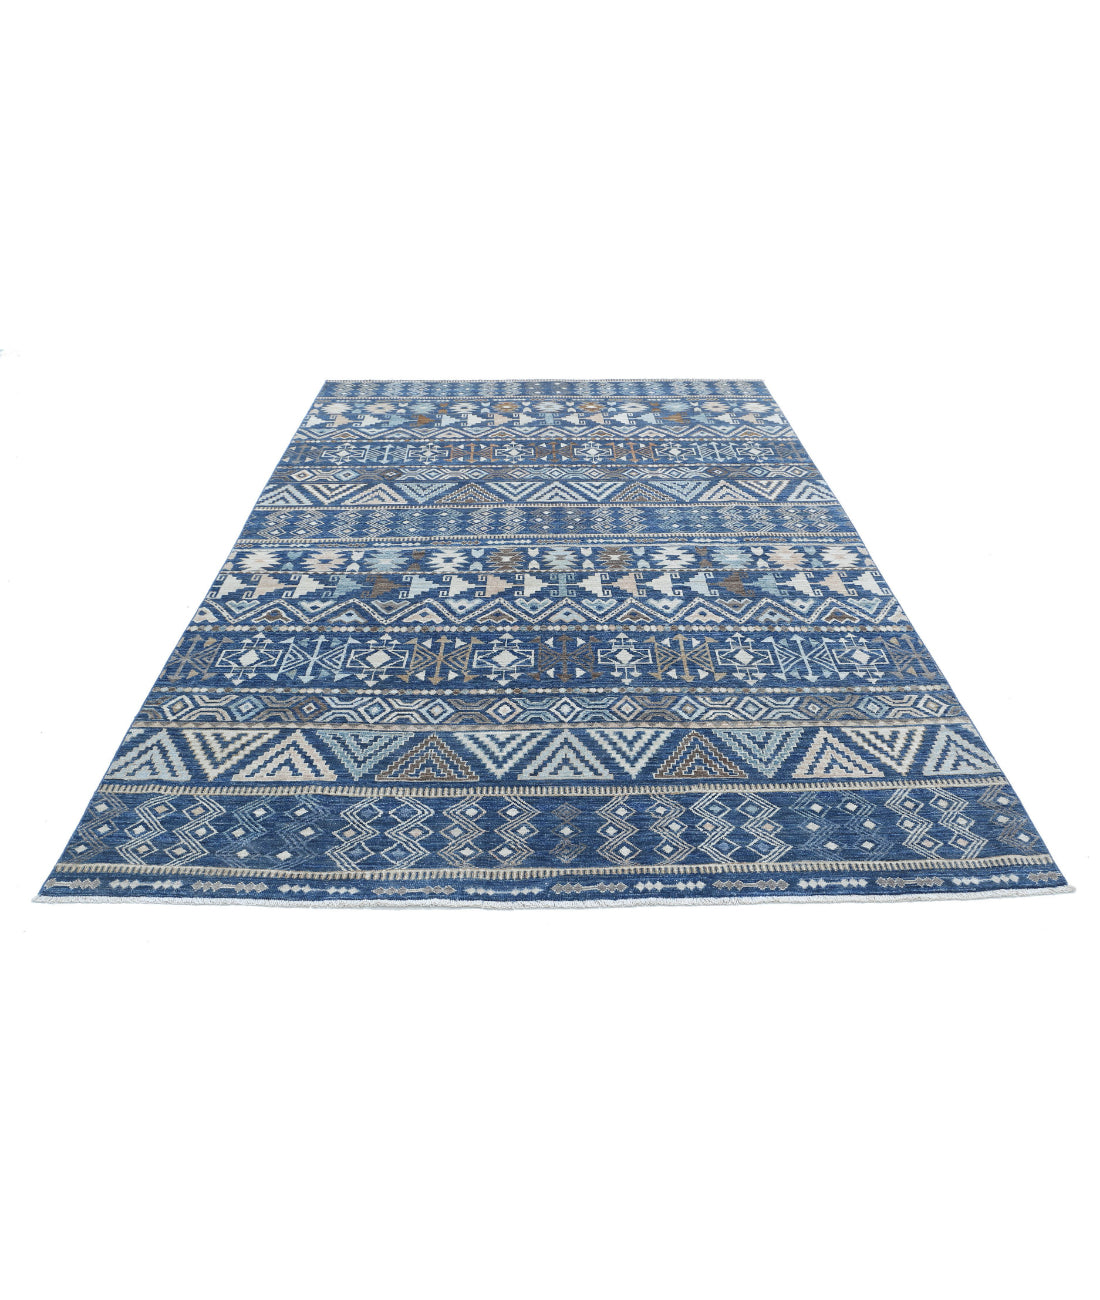 Hand Knotted Khurjeen Wool Rug - 6'9'' x 8'5'' 6'9'' x 8'5'' (203 X 253) / Blue / Ivory